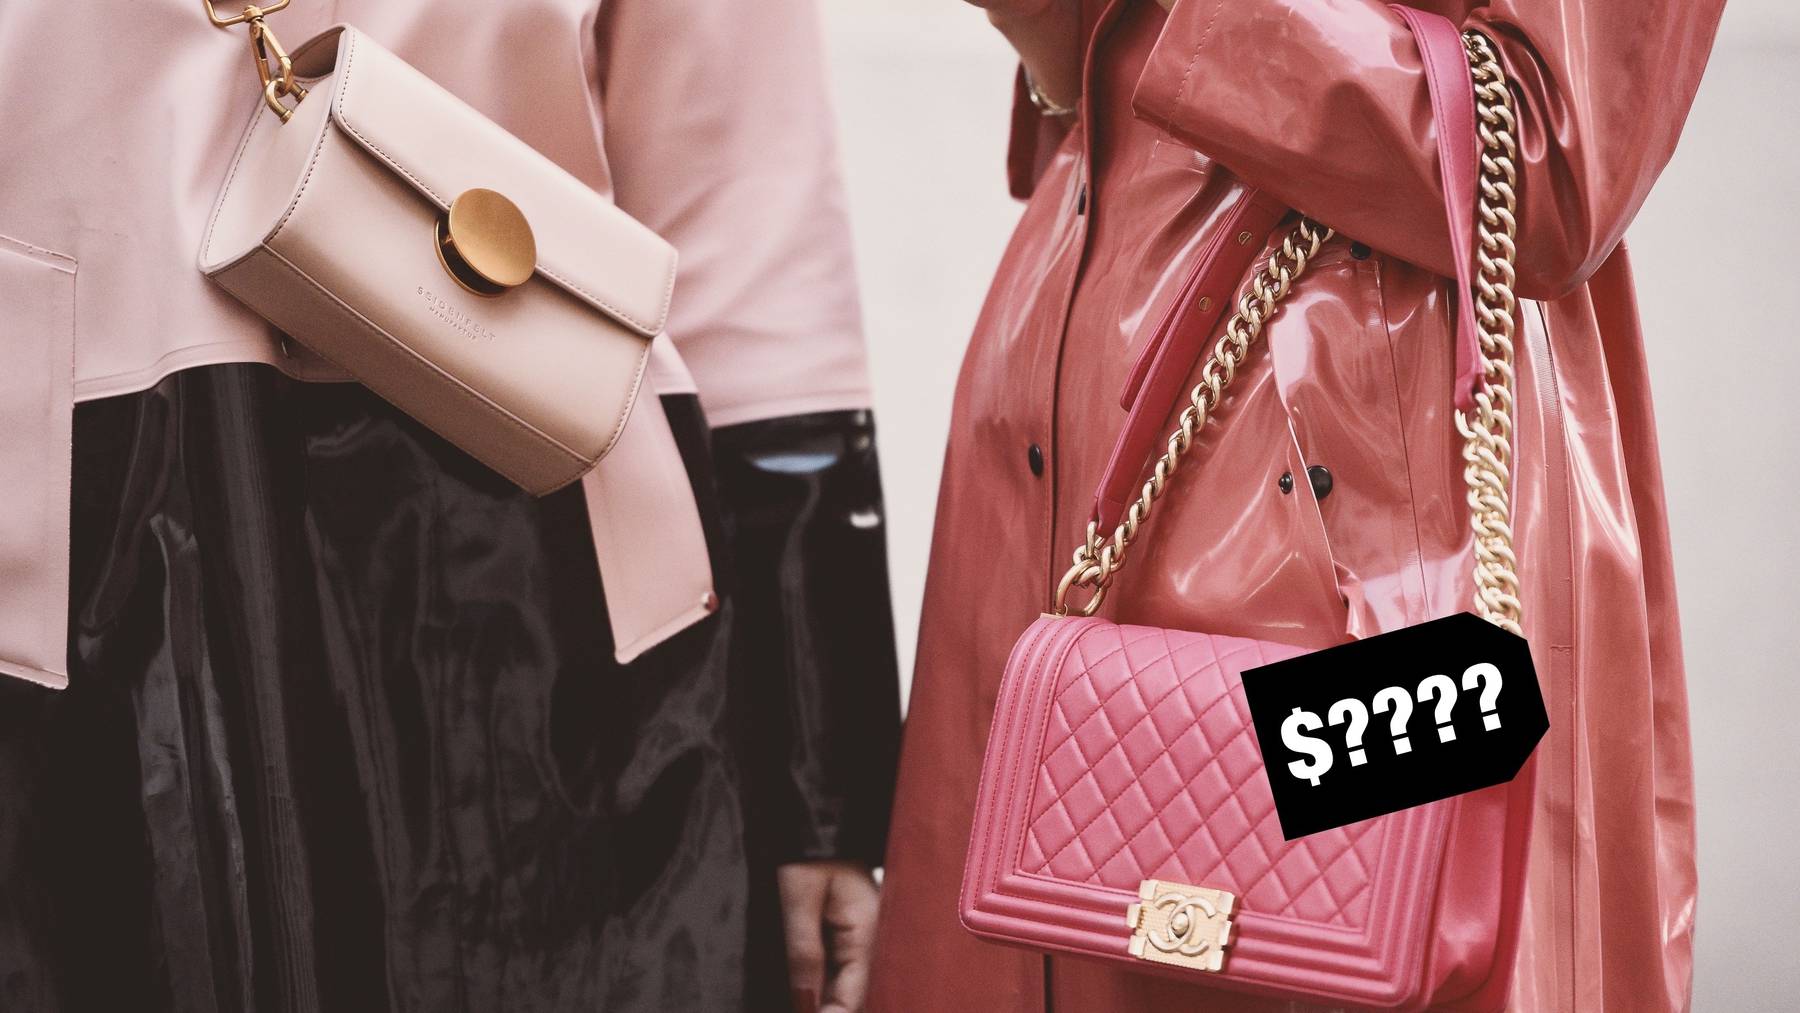 Luxury fashion prices continue to rise at brands like Louis Vuitton and Chanel. Shutterstock.